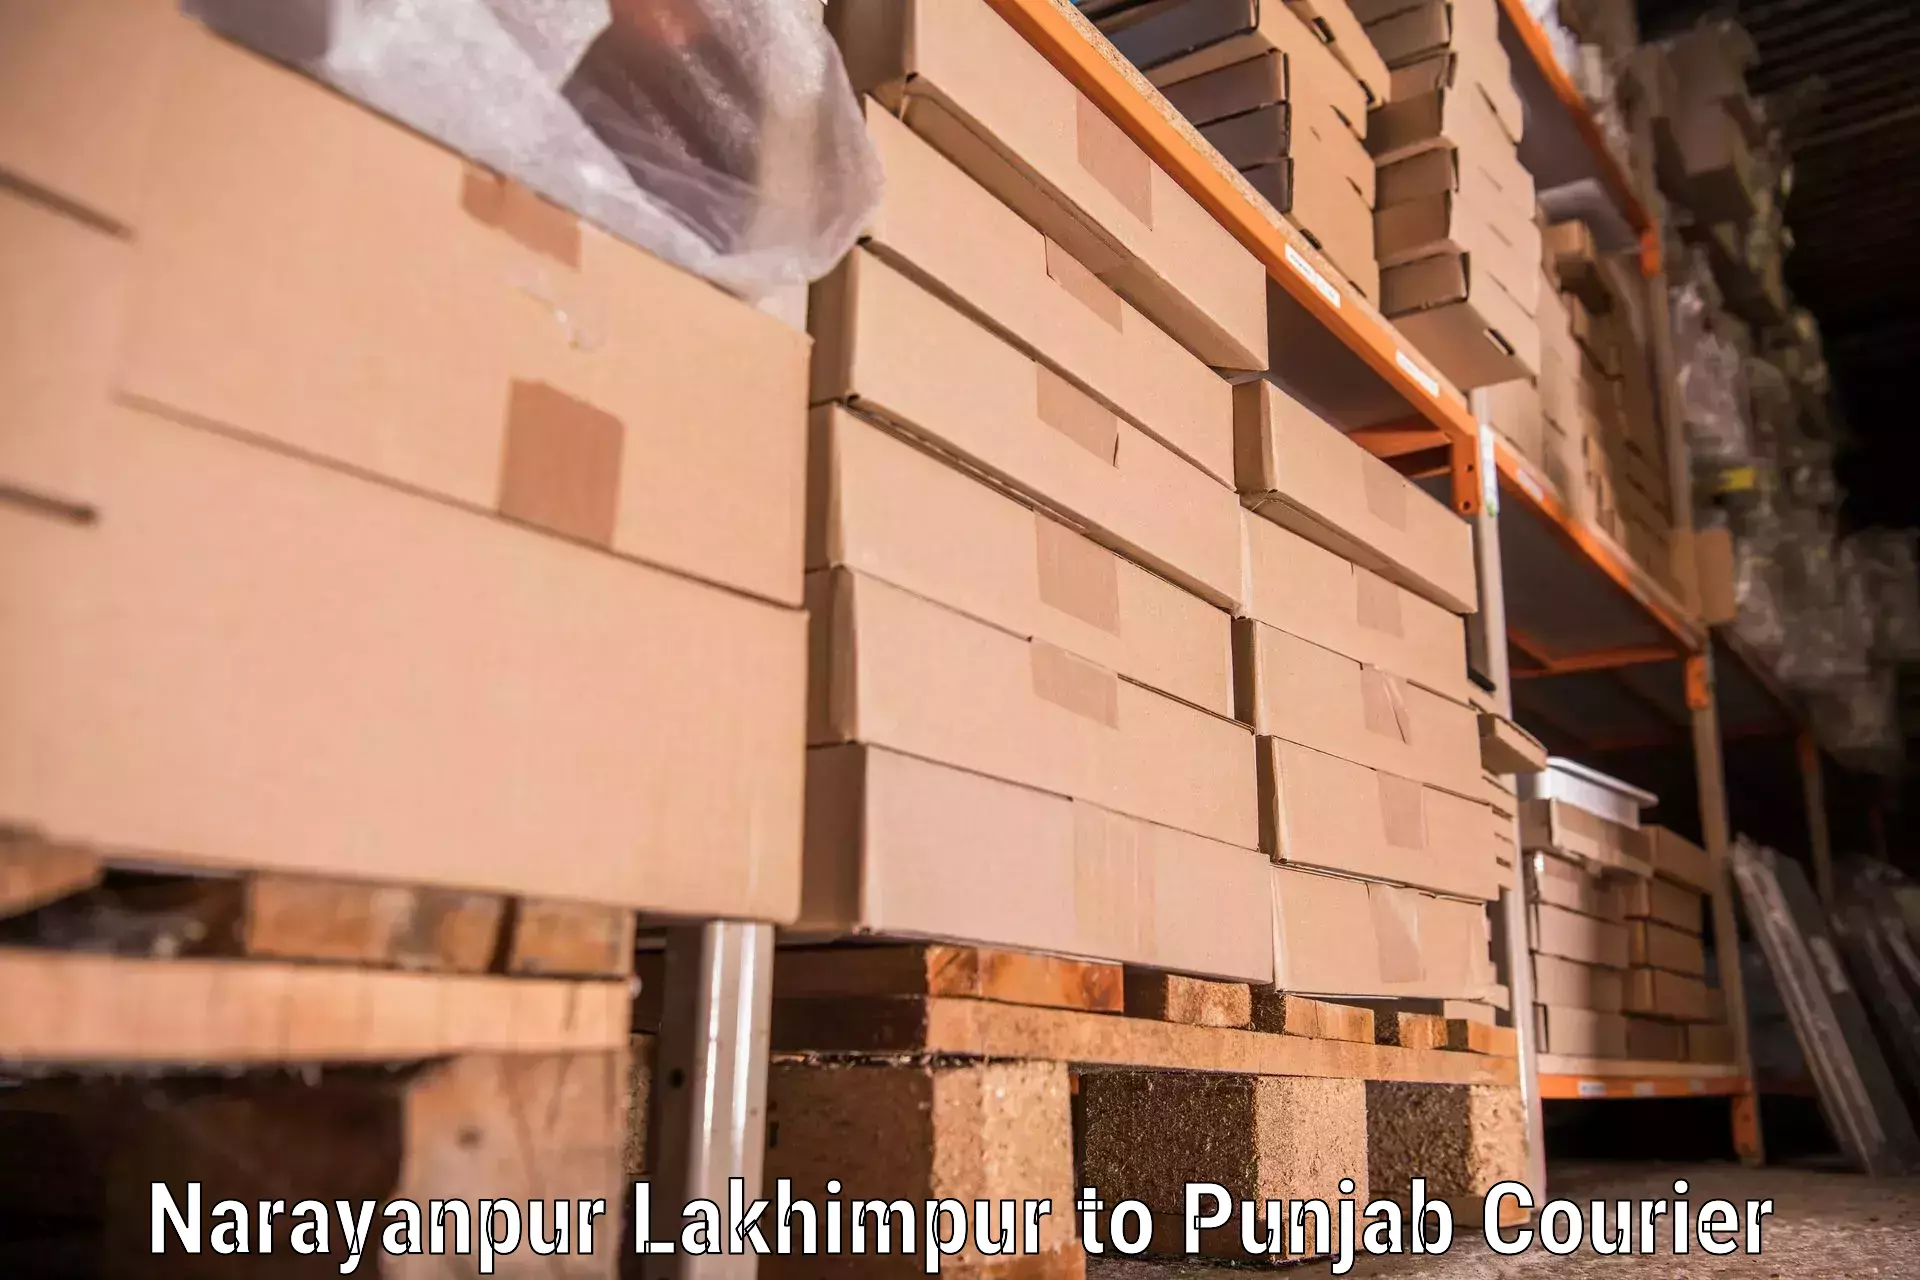 Door-to-door relocation services Narayanpur Lakhimpur to Dharamkot